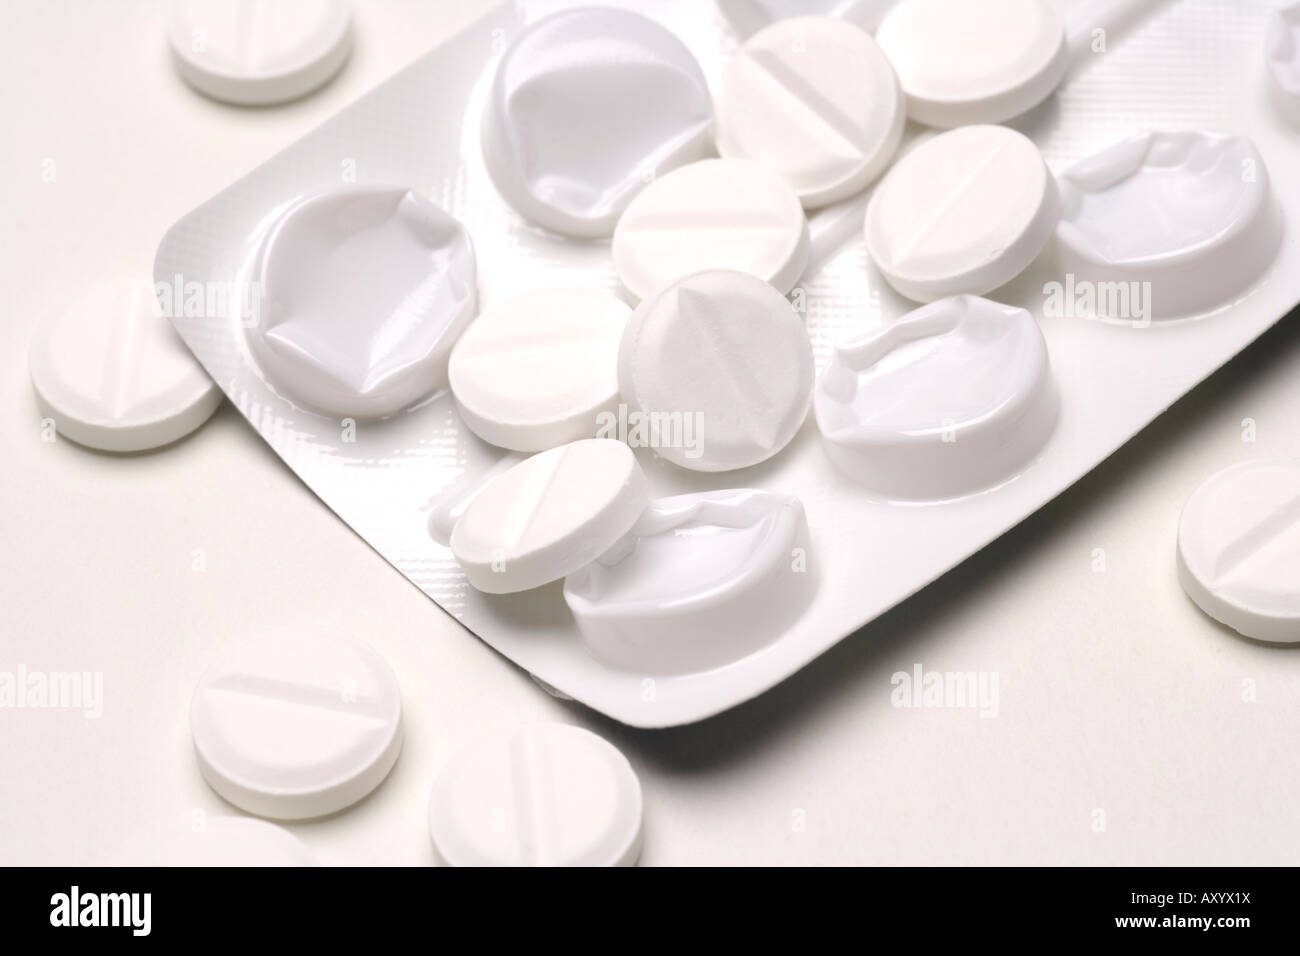 Medicine packaging tablets pills drugs and a blister pack healthcare aspirin or paracetamol Stock Photo